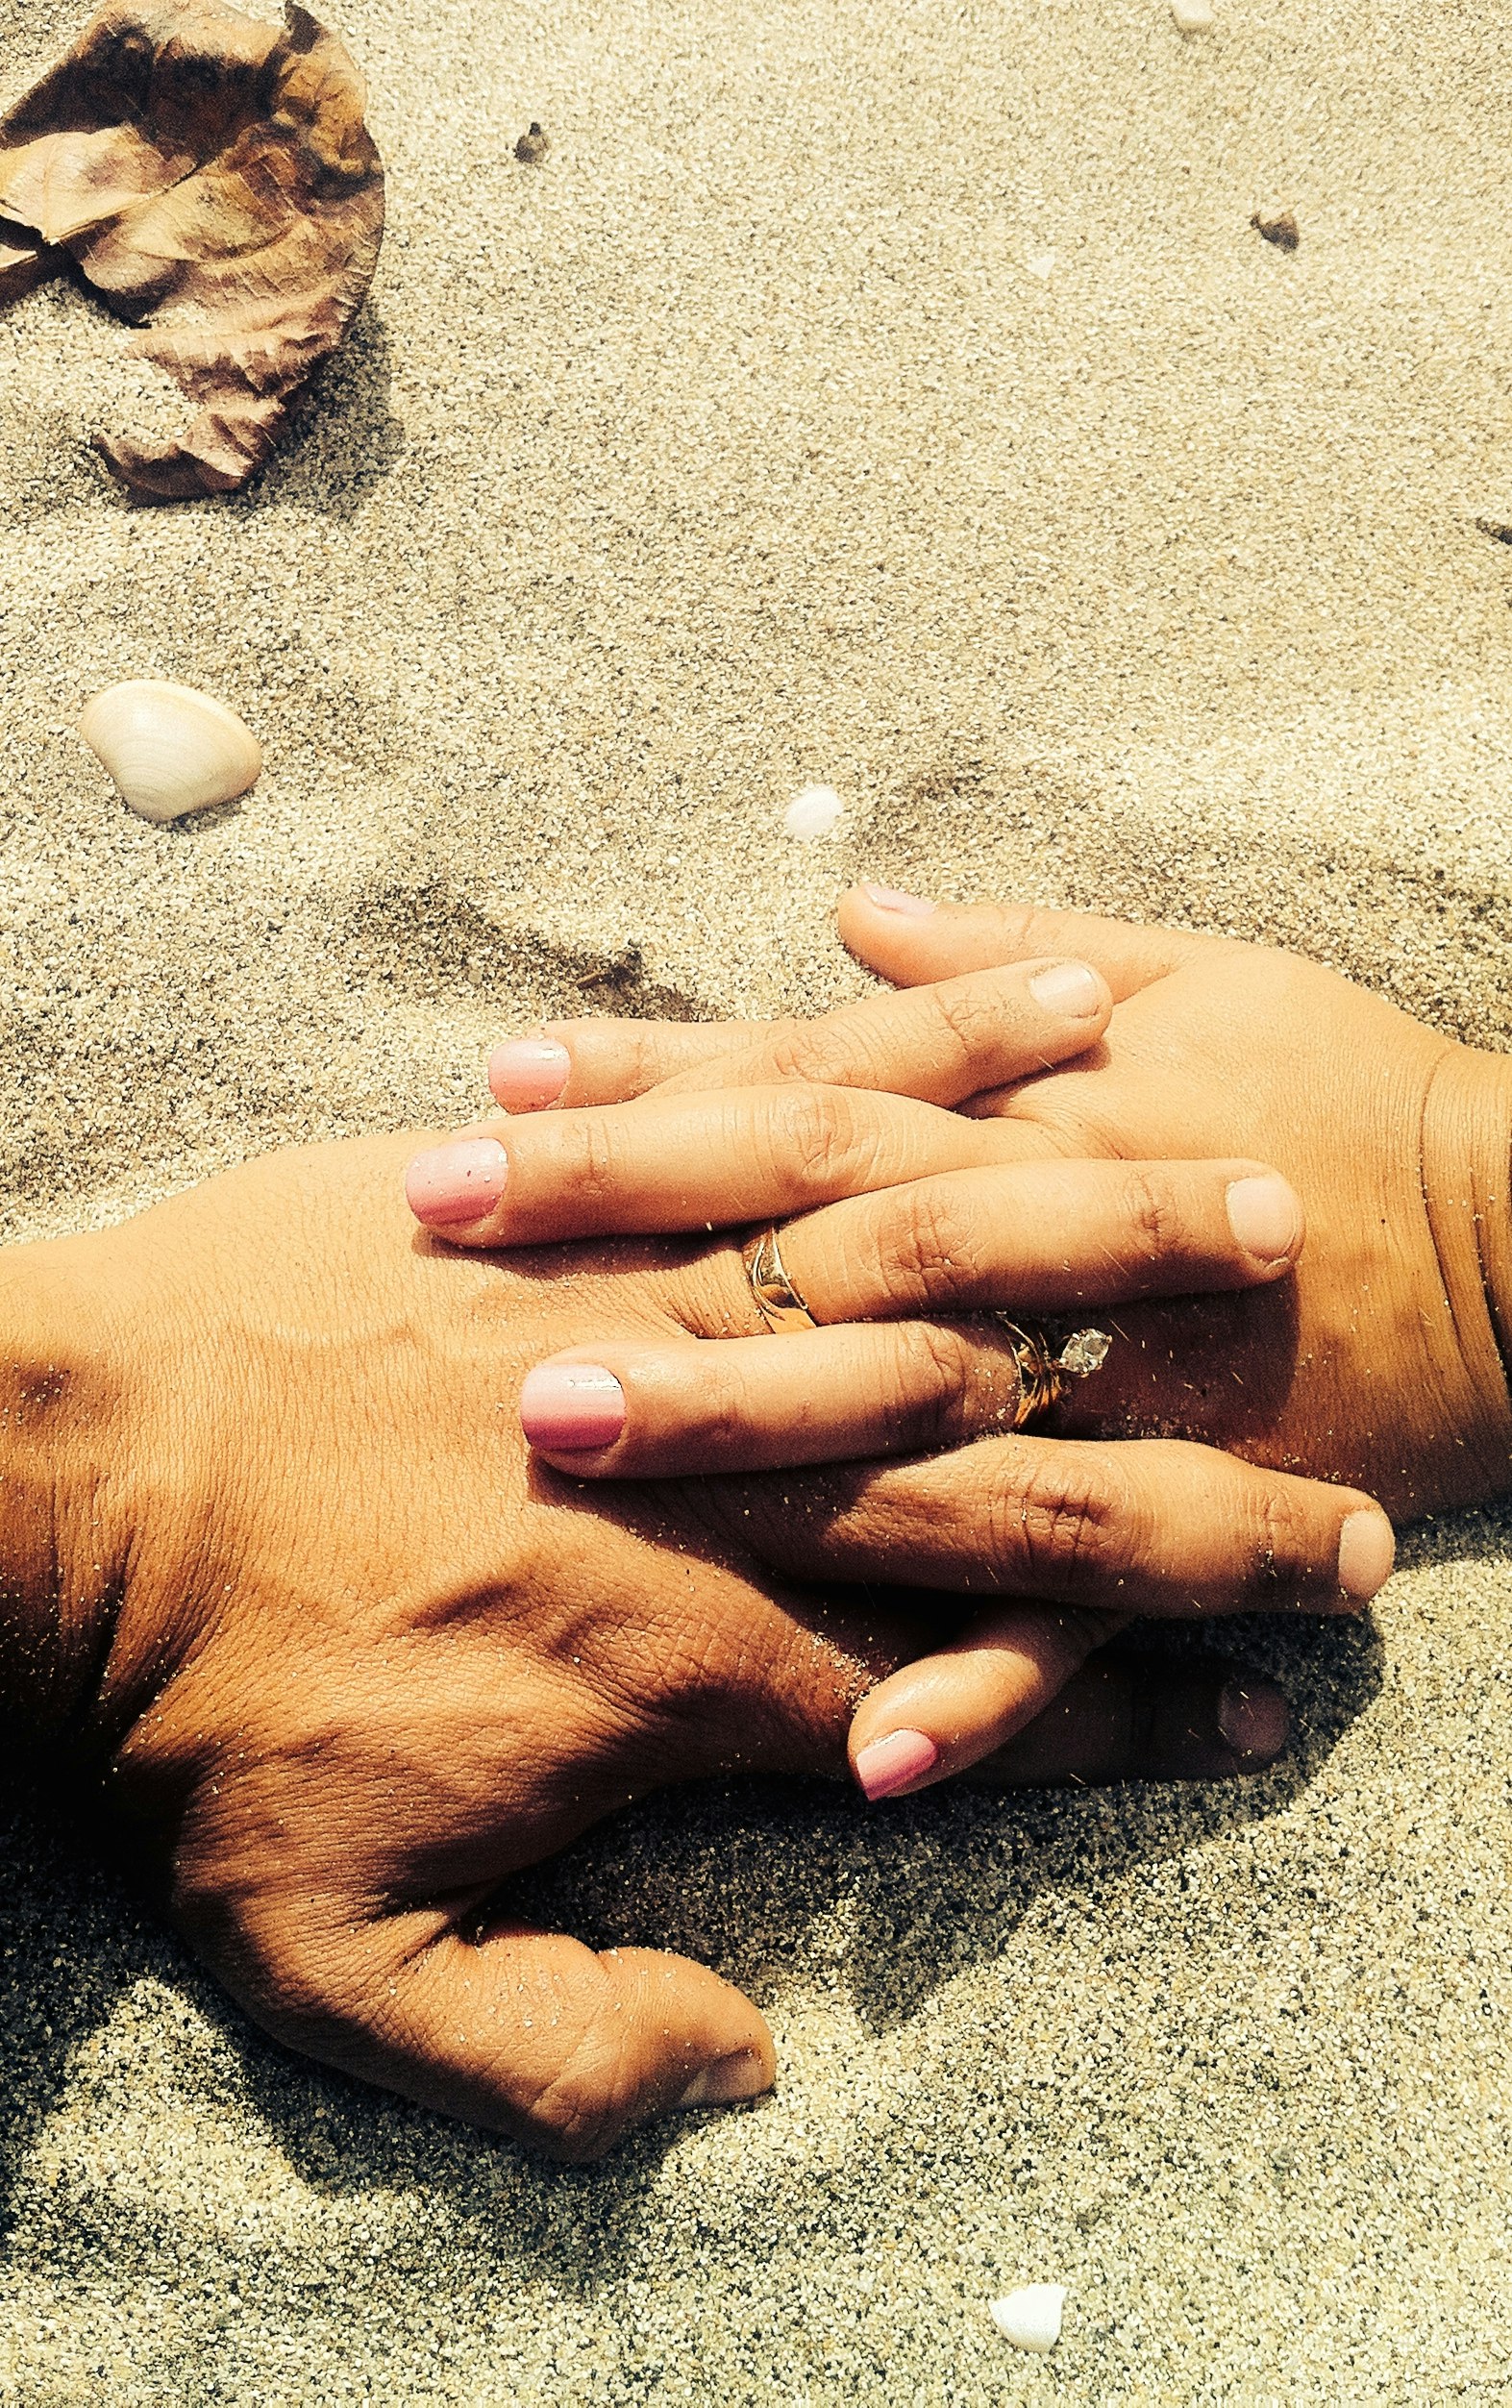 Lovers’ hands on sand